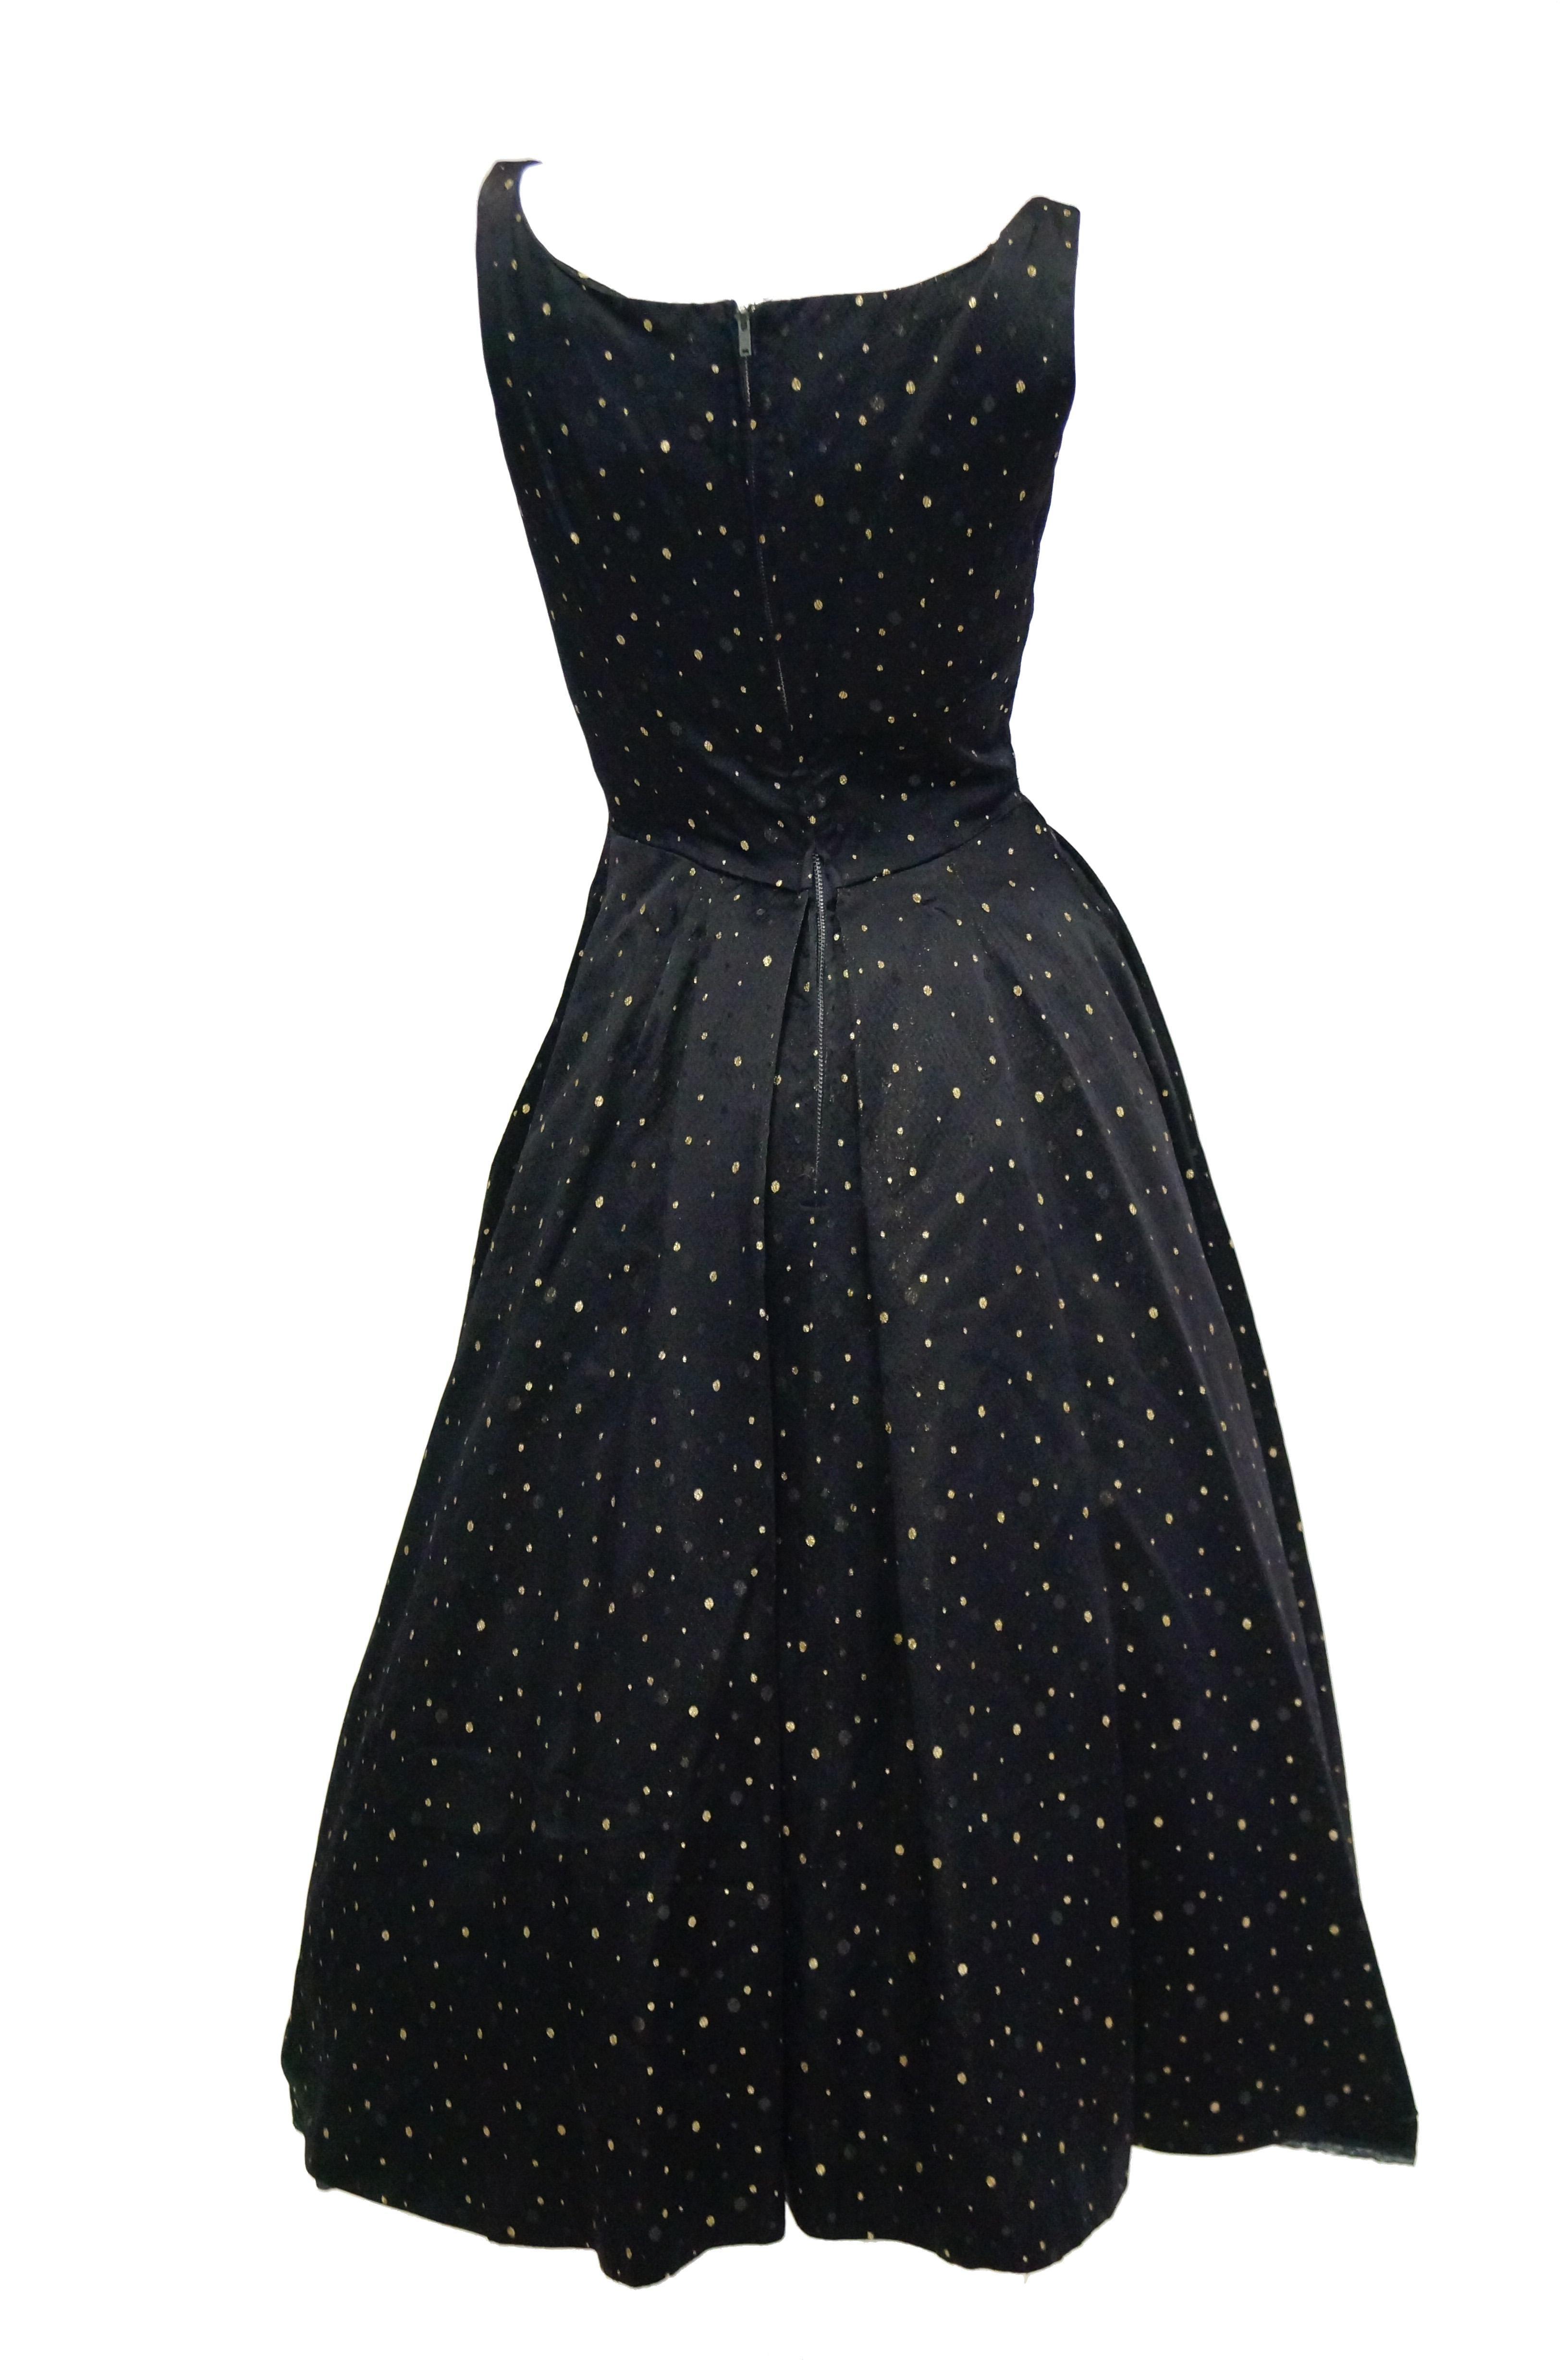 1950s Suzy Perette Black and Gold New Look Evening Dress with Shimmer Dot and  In Excellent Condition For Sale In Houston, TX